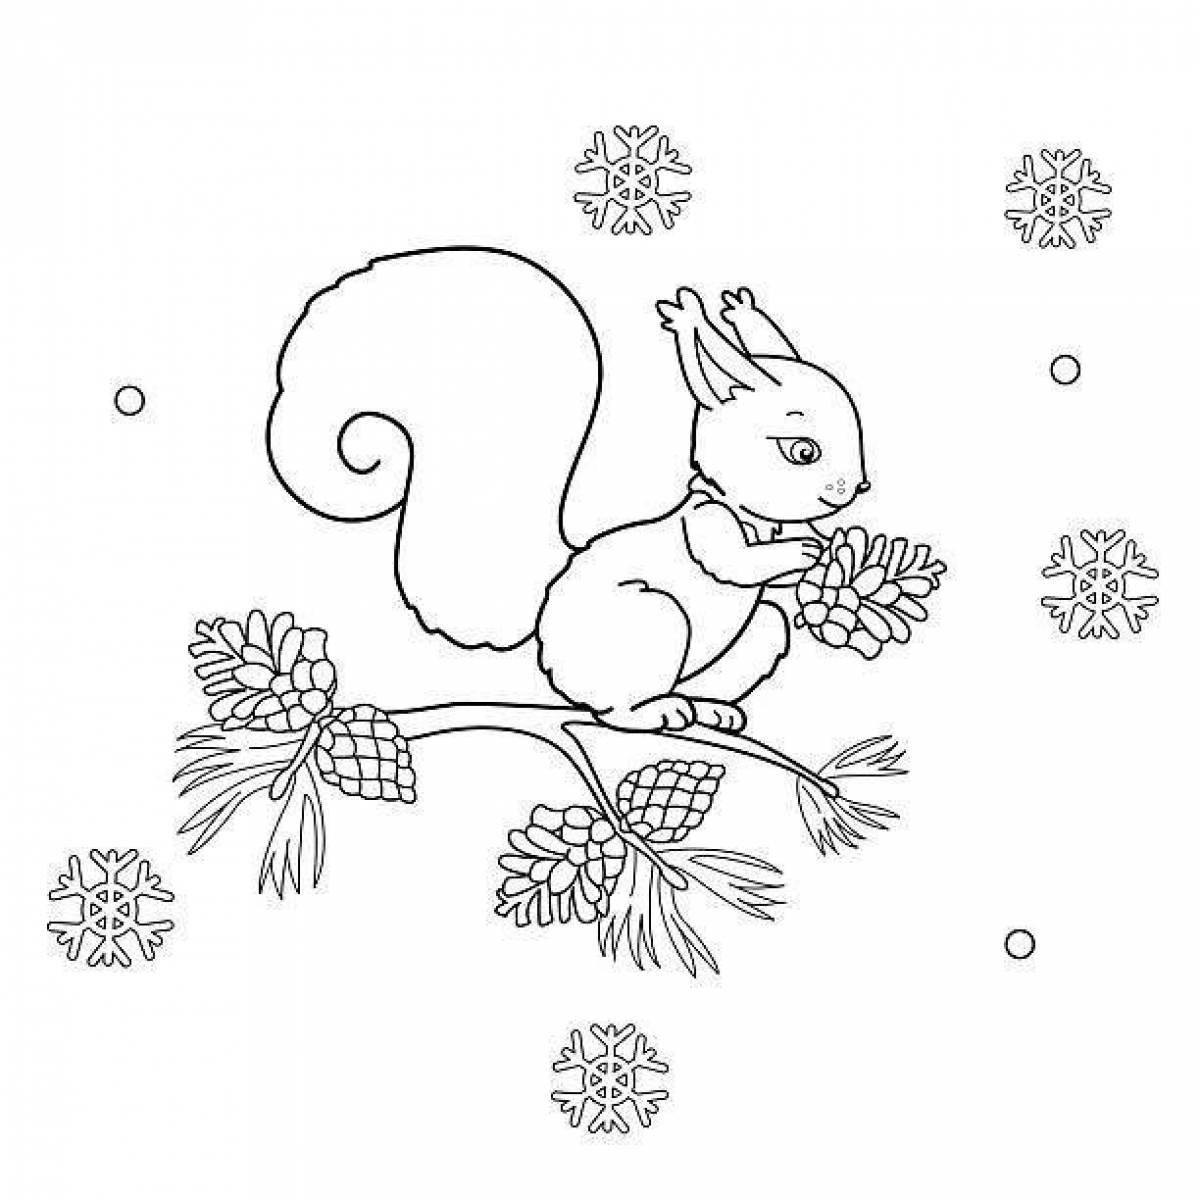 Coloring pages animals for children in winter